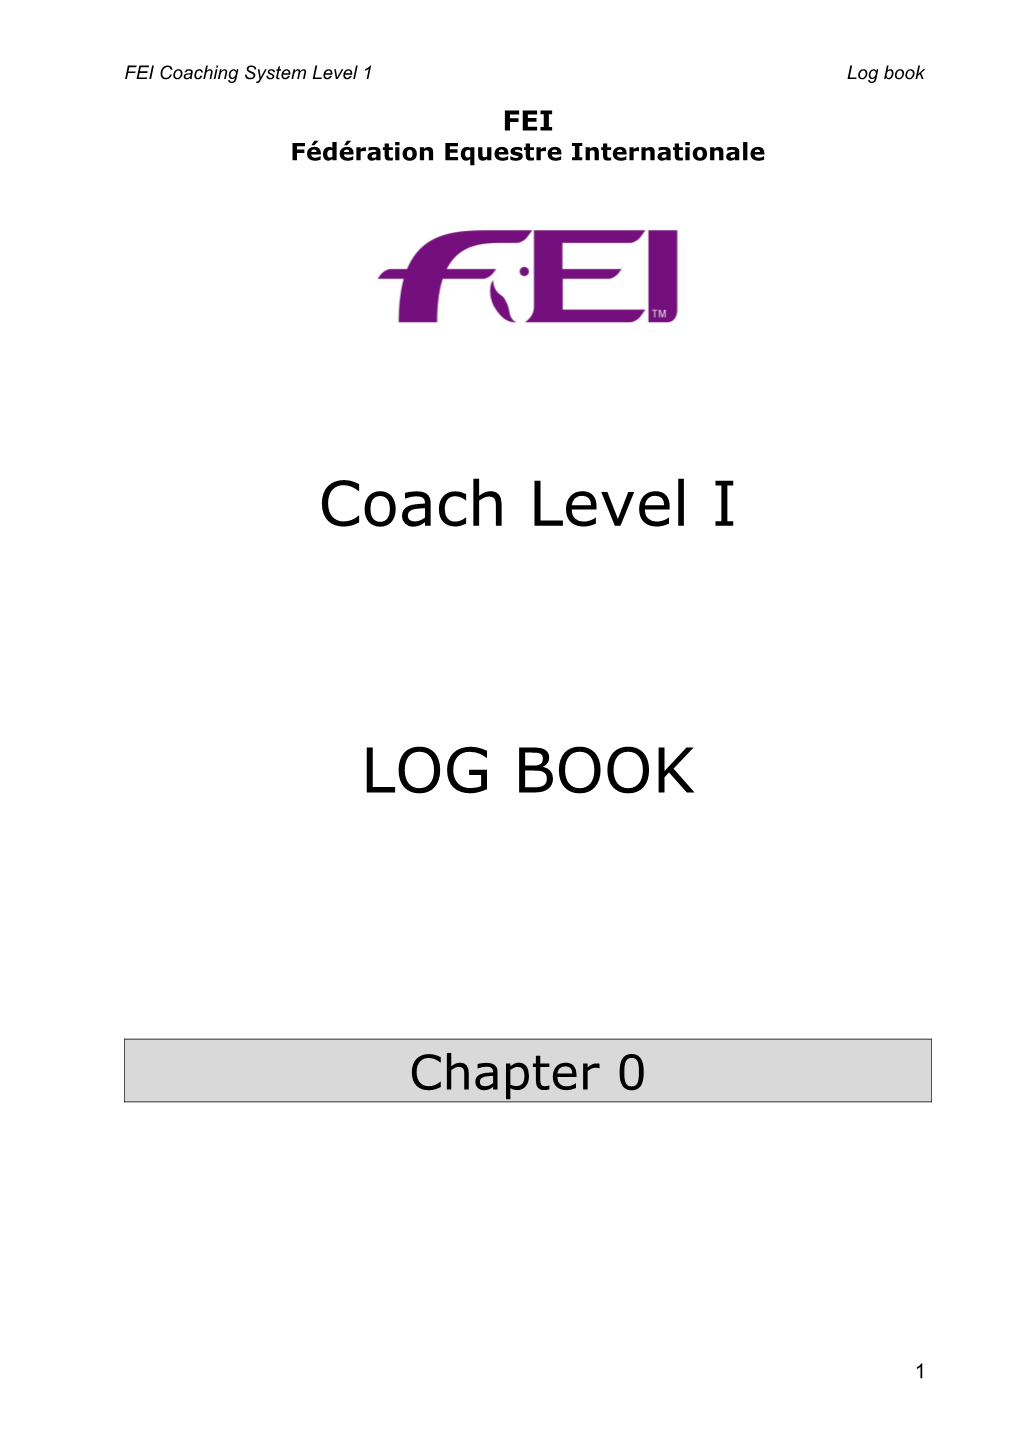 FEI Coaching System Level 1Logbook